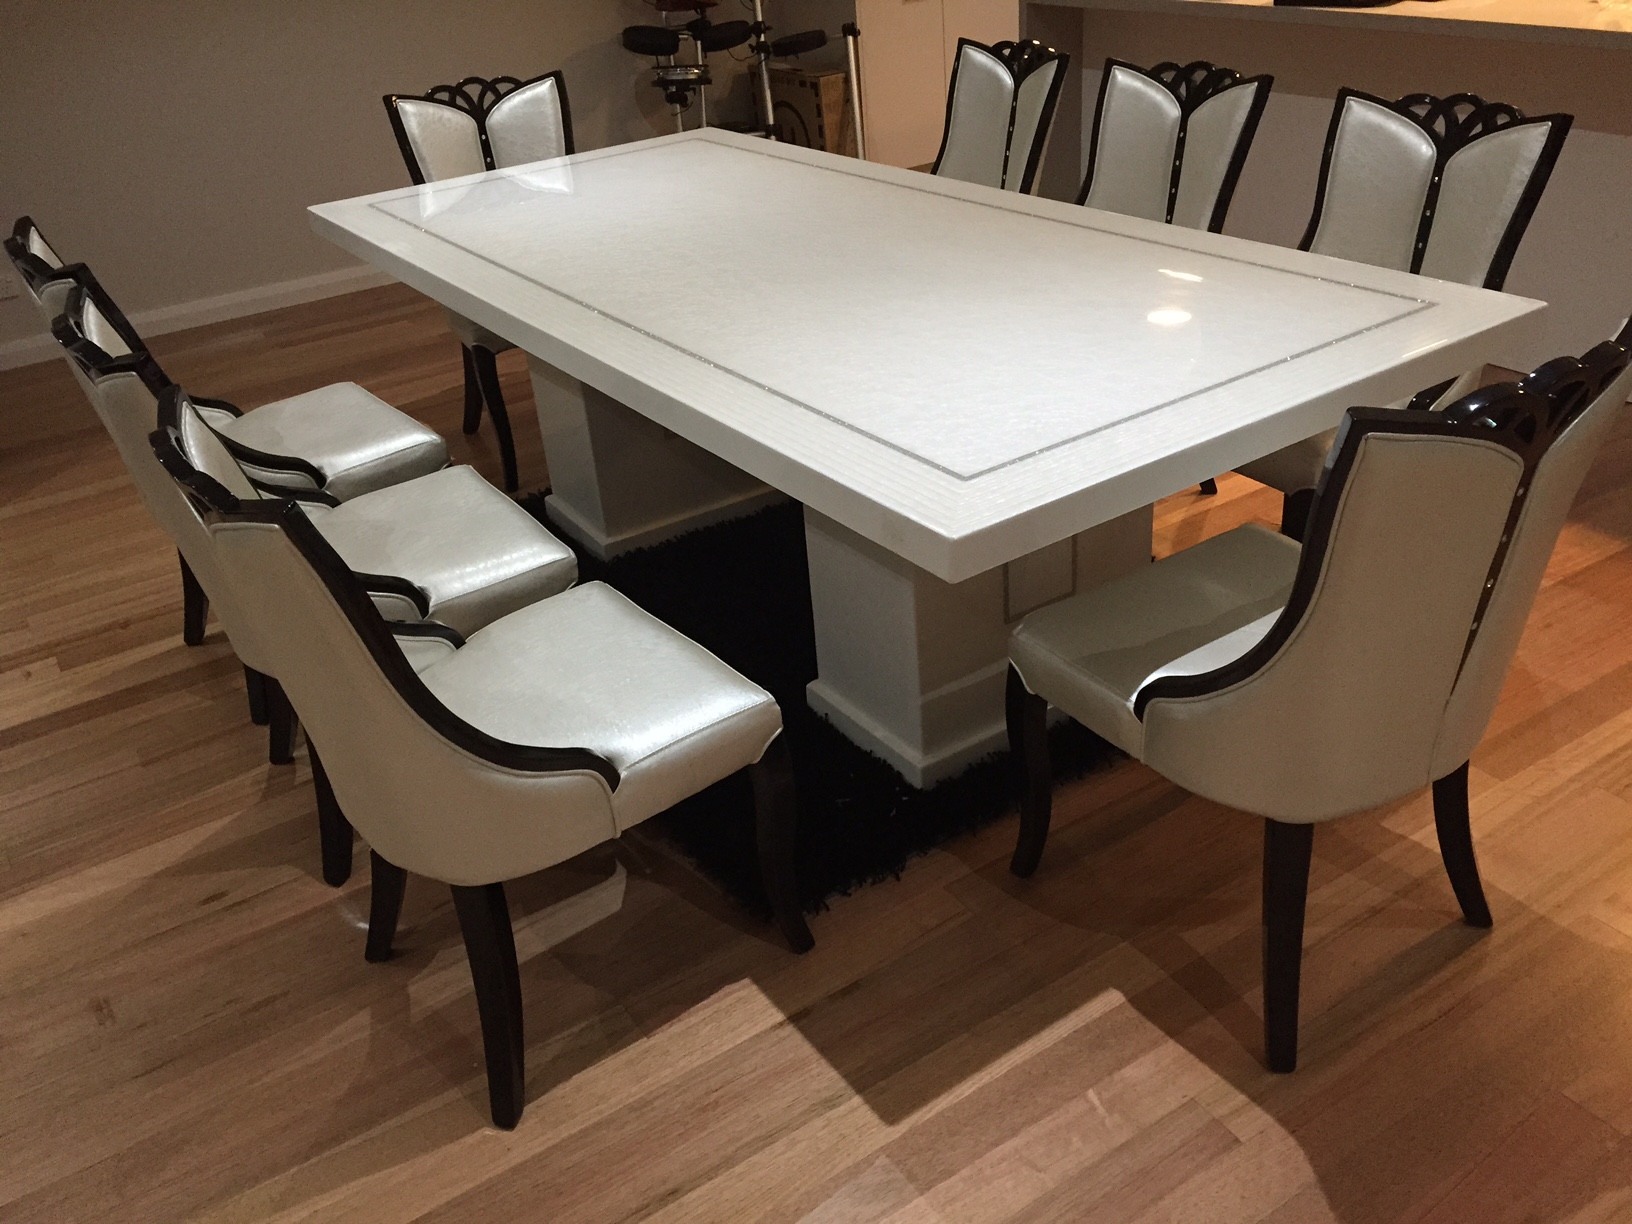 8 Chair Dinner Table
 Bianca Marble Dining table with 8 Chairs